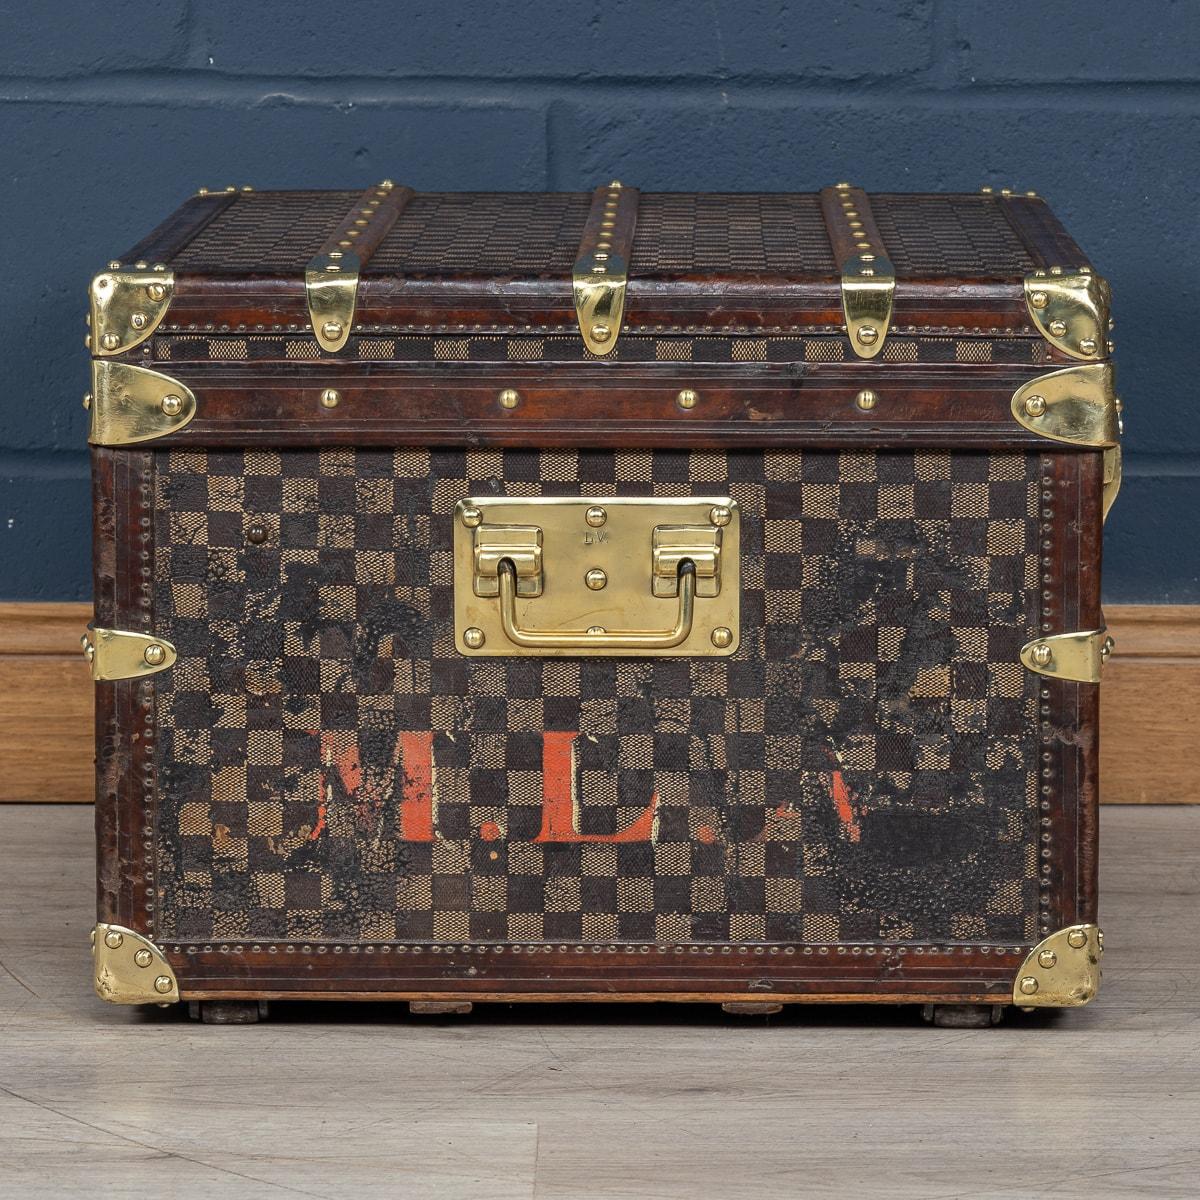 Rare 19th Century Louis Vuitton Shirt Trunk In Damier Canvas, France c.1895 In Good Condition For Sale In Royal Tunbridge Wells, Kent